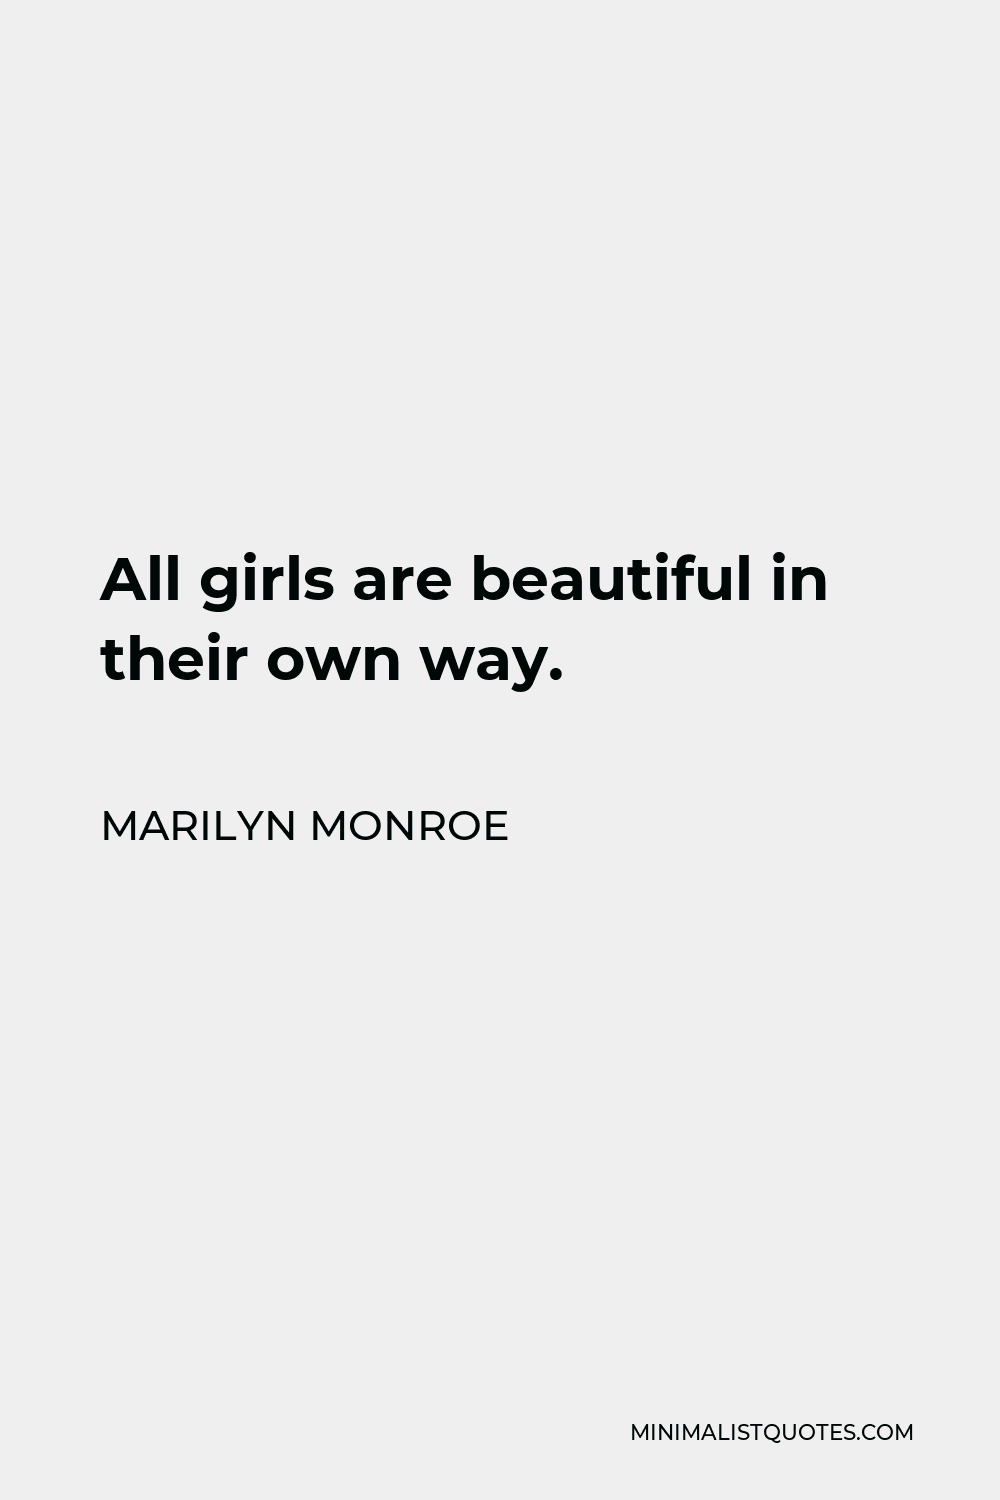 Marilyn Monroe Quote - All girls are beautiful in their own way.